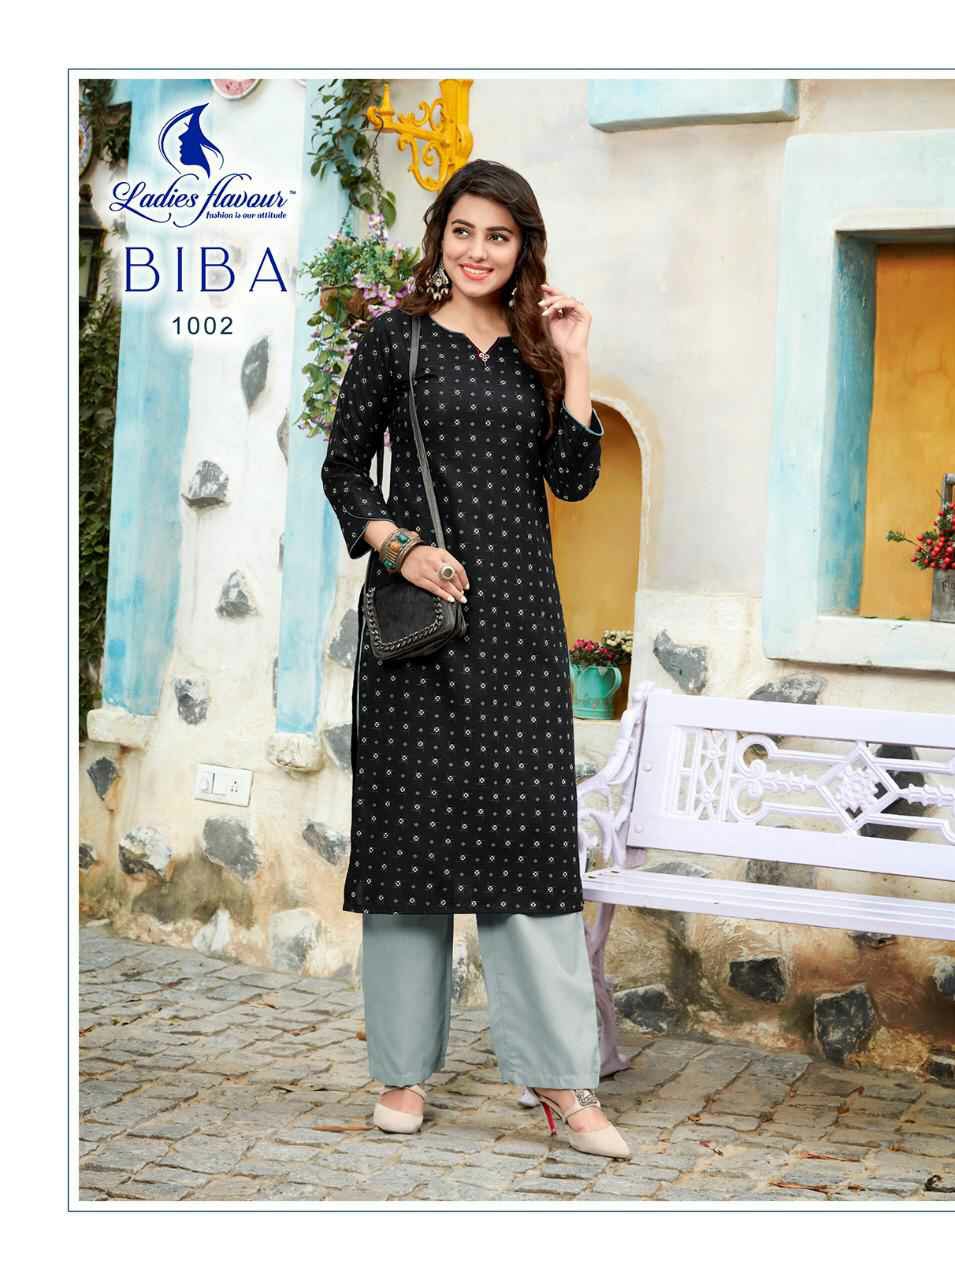 Where can I buy an online 5XL Kurtis in India online? - Quora